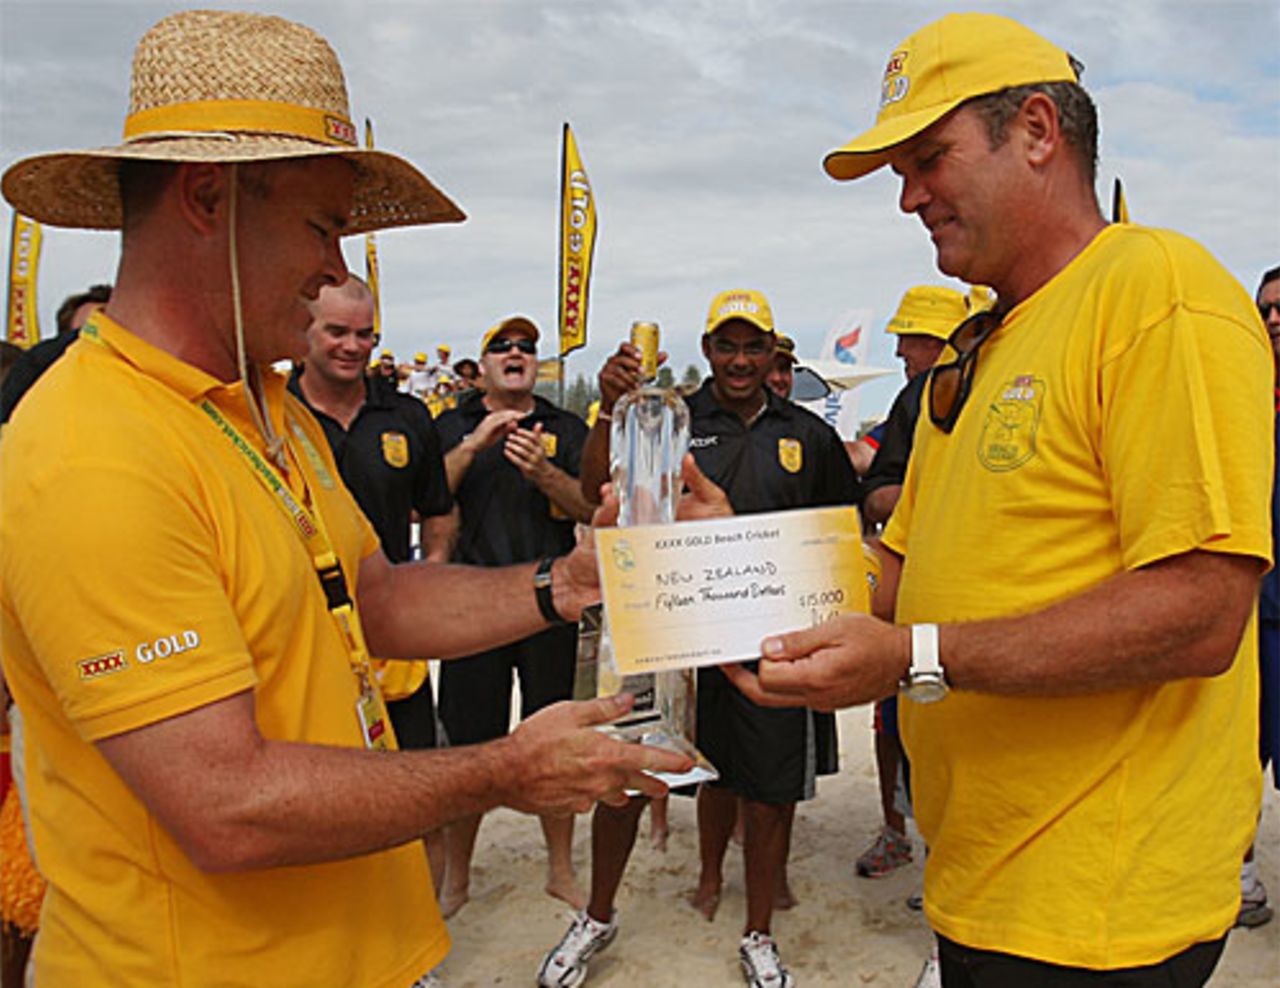 Martin Crowe accepts the winners' cheque for New Zealand in their first year of beach cricket, XXXX Gold tournament, Brisbane, January 20, 2007